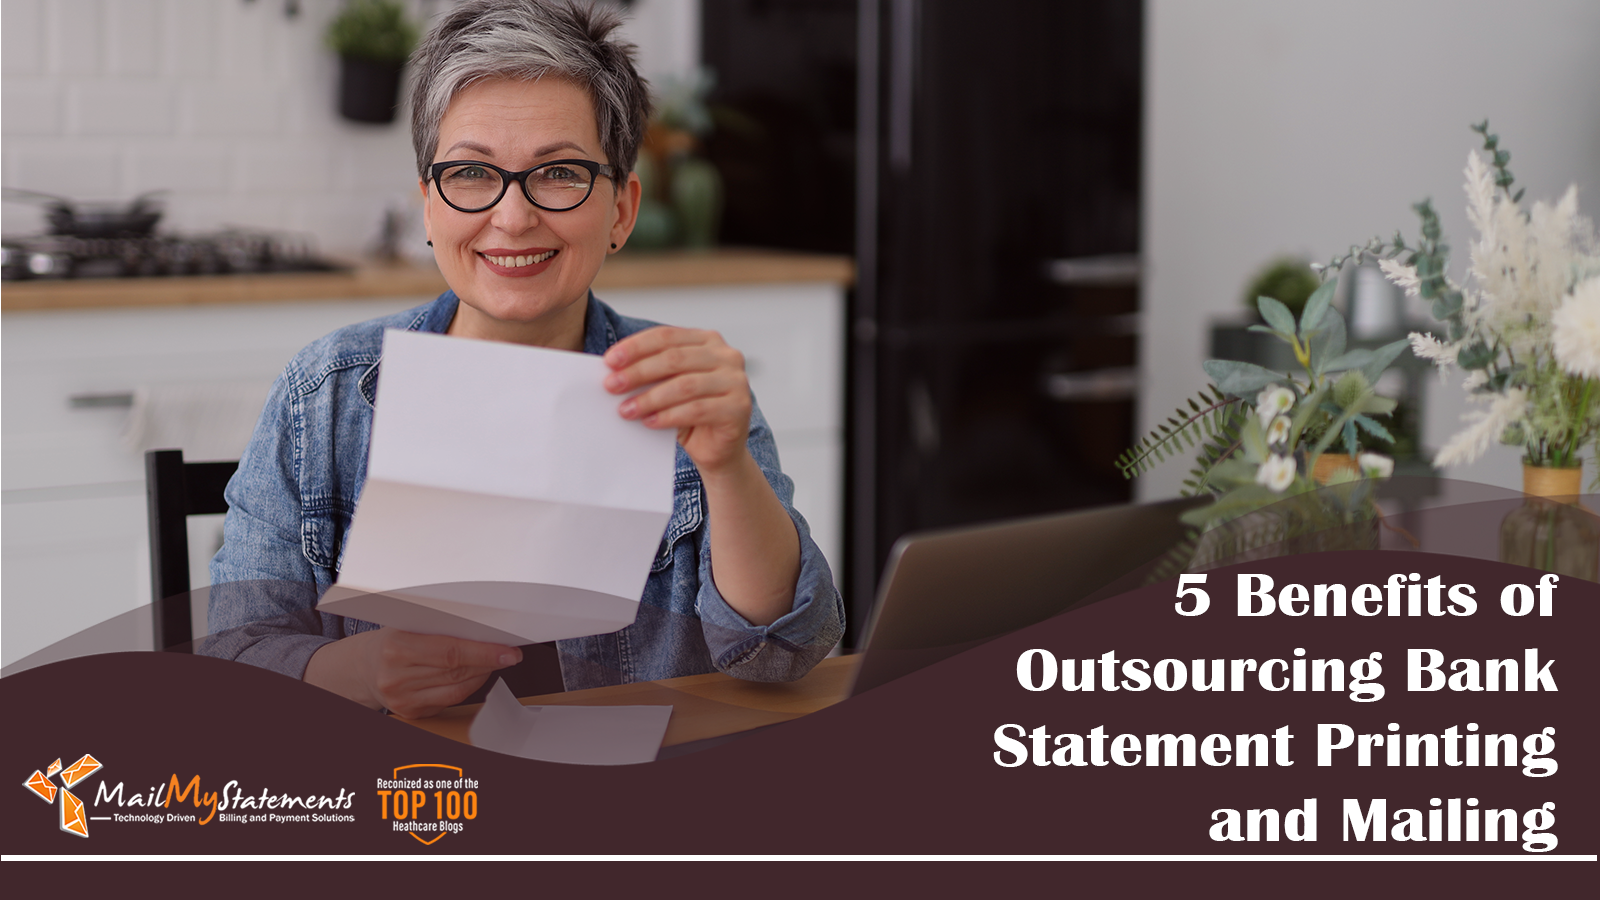 5 Benefits of Outsourcing Bank Statement Printing and Mailing